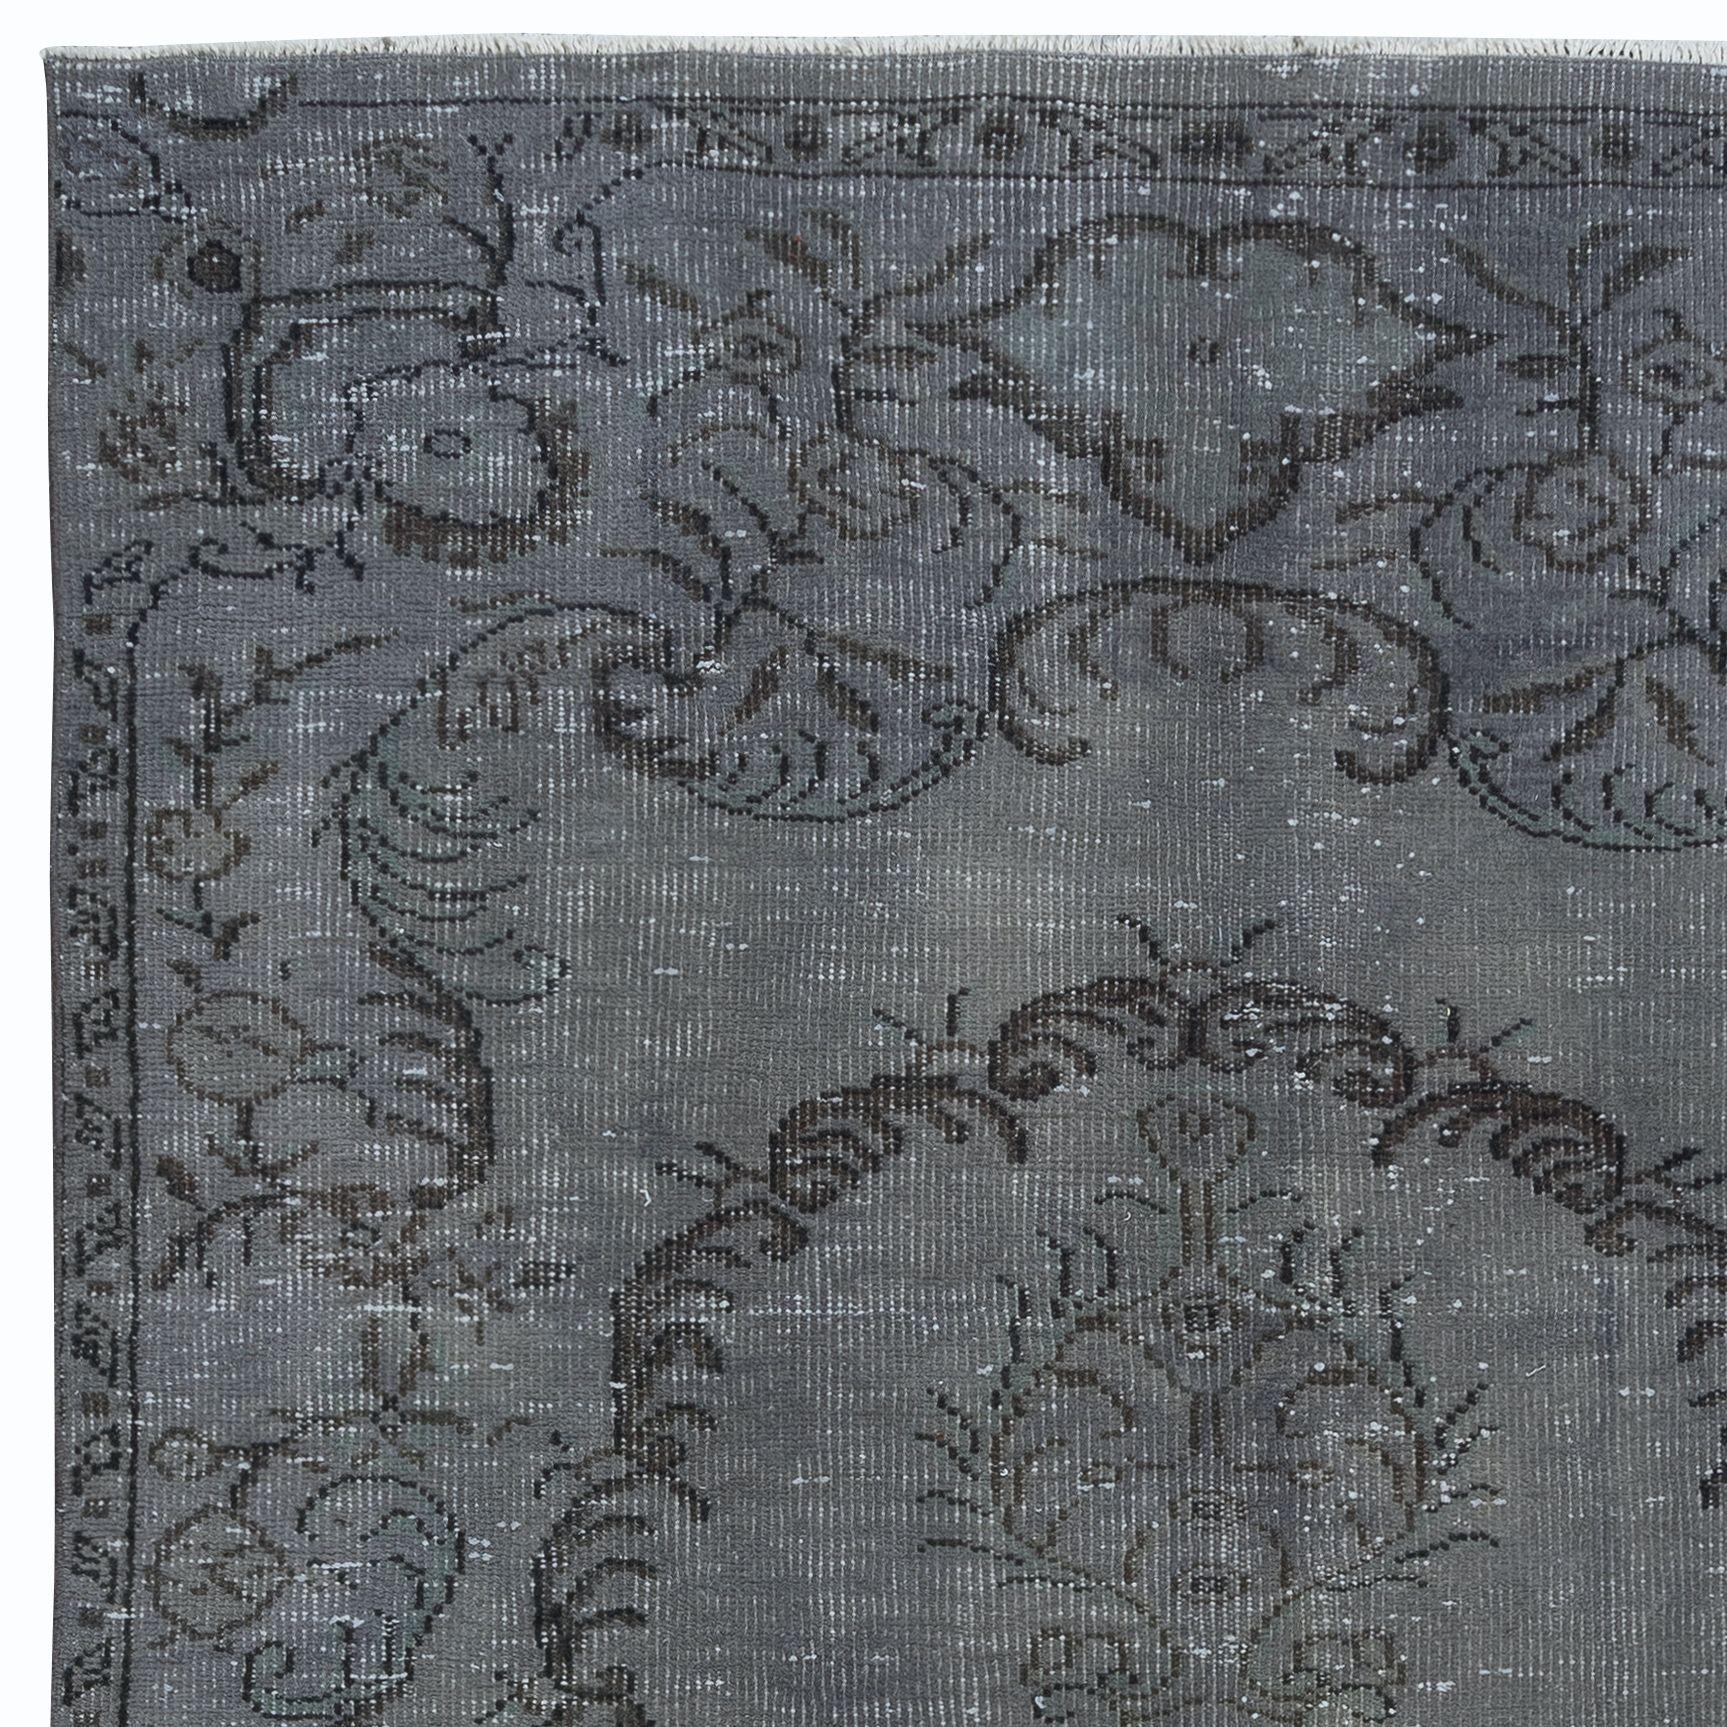 Hand-Woven 5.2x8.6 Ft Handmade Turkish Rug Over-Dyed in Gray, Vintage Upcycled Carpet For Sale